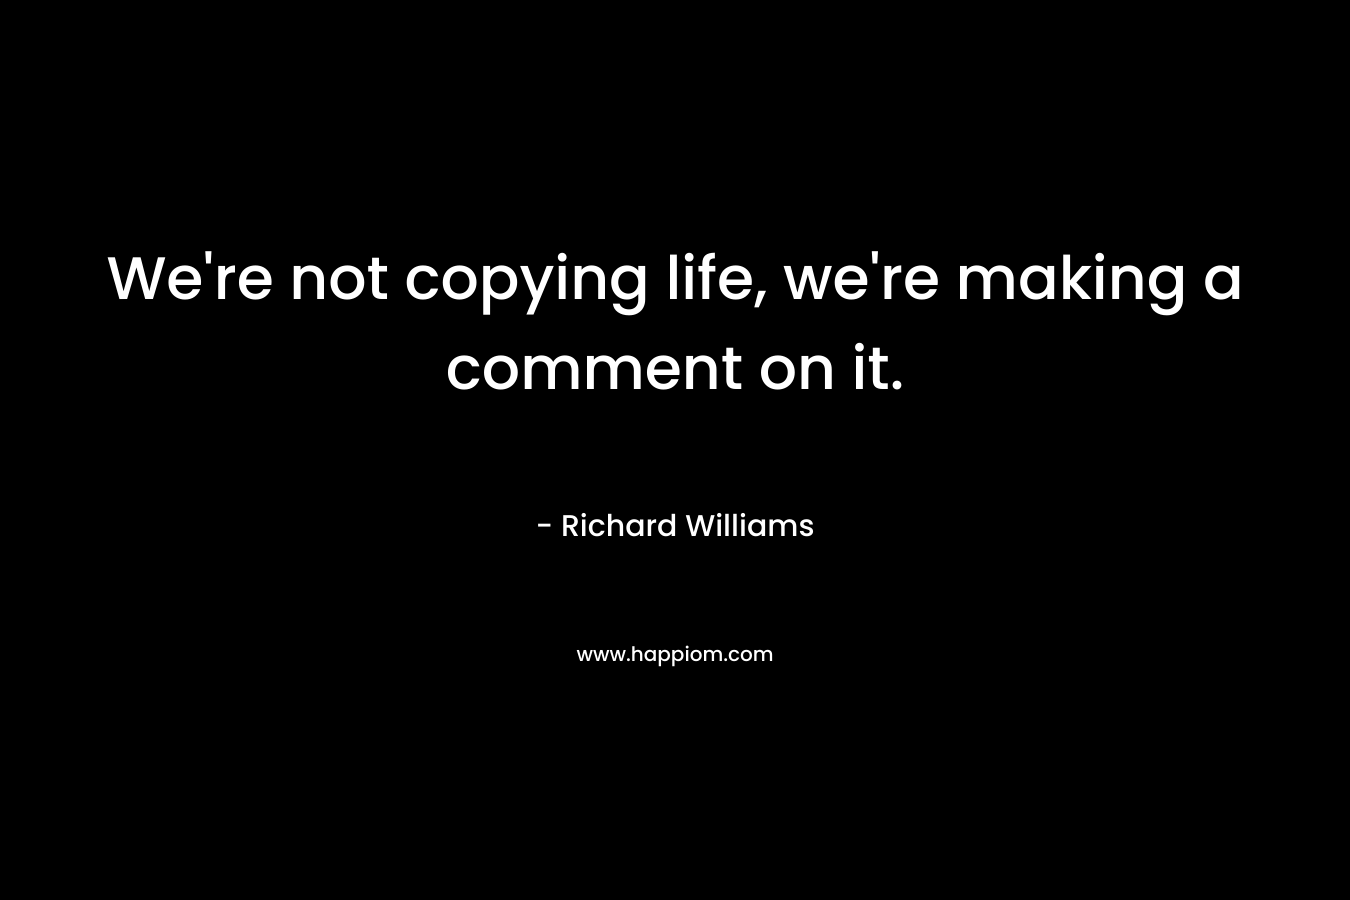 We’re not copying life, we’re making a comment on it. – Richard Williams